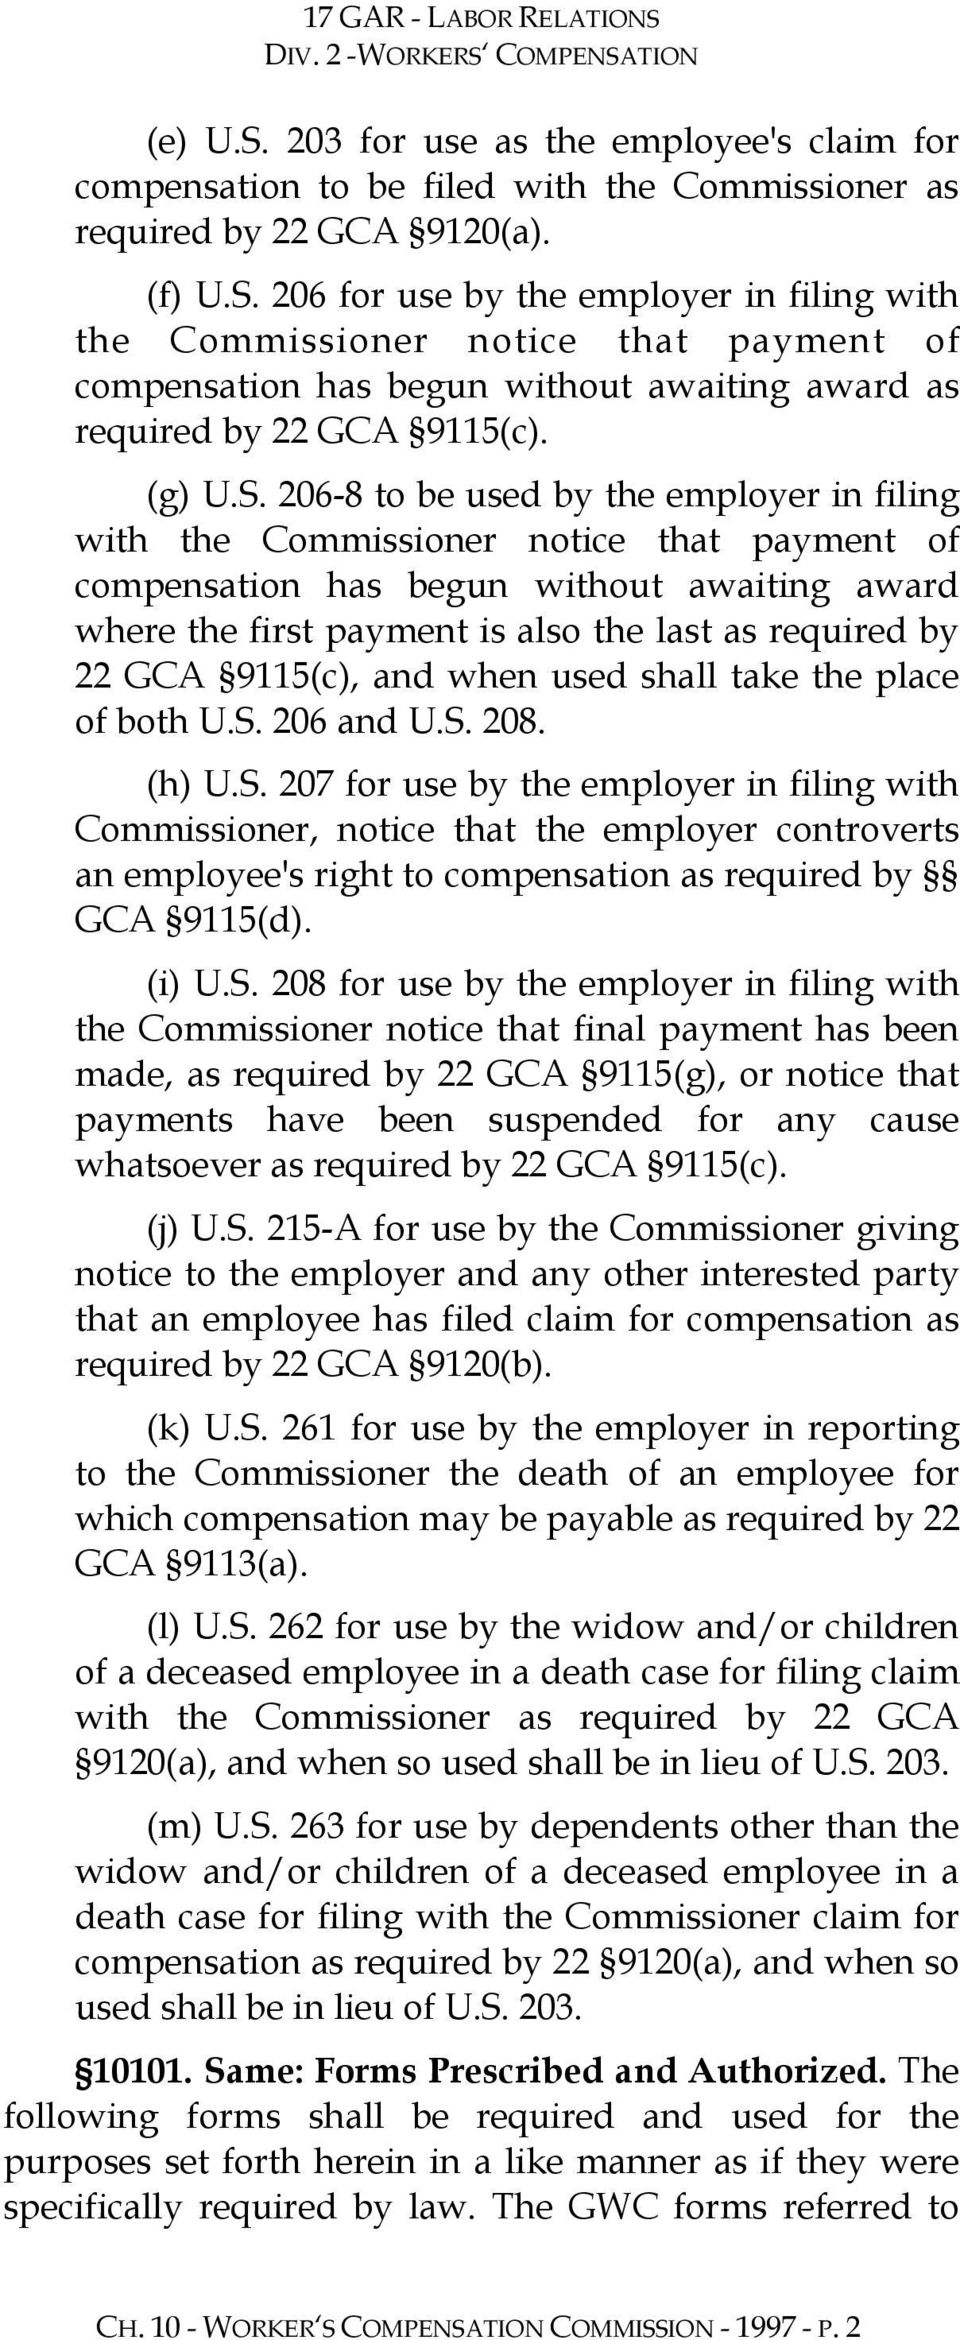 206-8 to be used by the employer in filing with the Commissioner notice that payment of compensation has begun without awaiting award where the first payment is also the last as required by 22 GCA